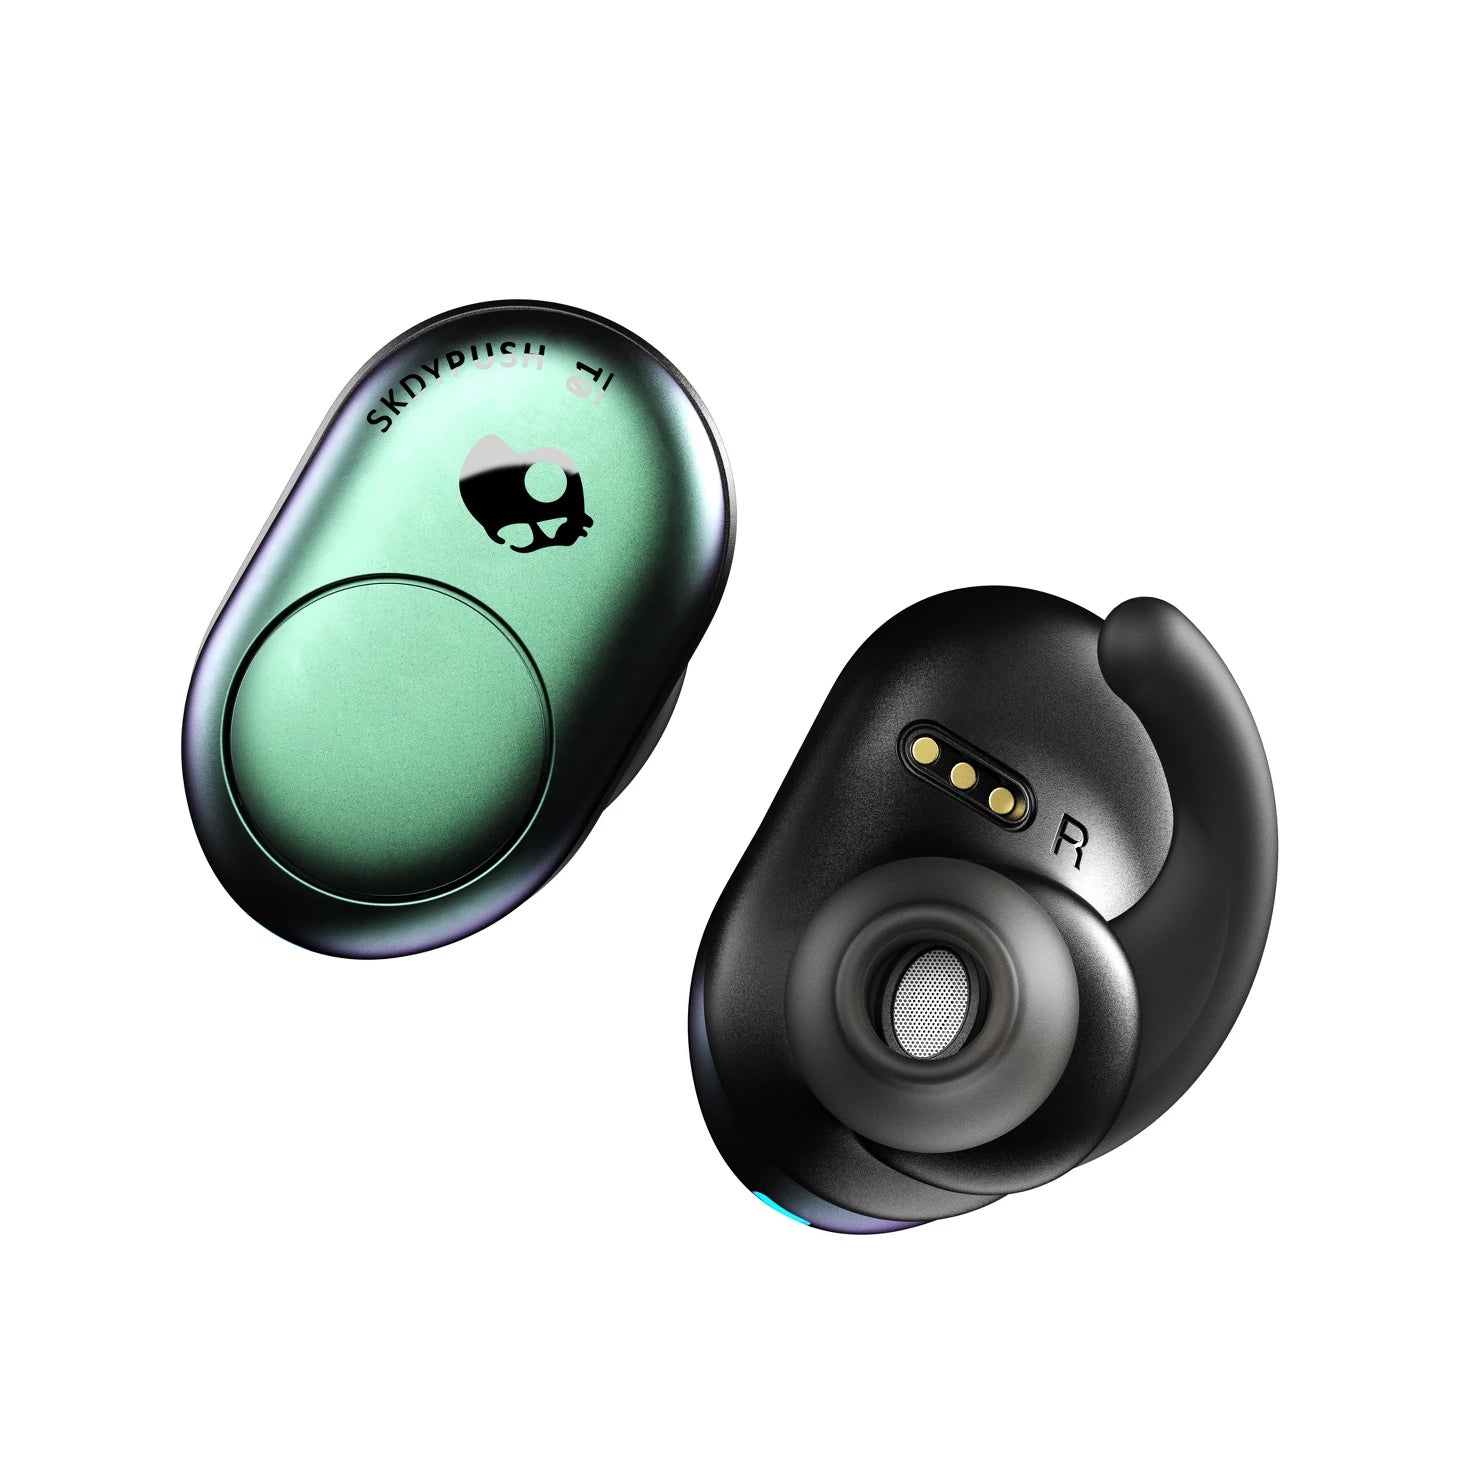 Skullcandy Push Truly Wireless Earbuds Psycho Tropical Teal